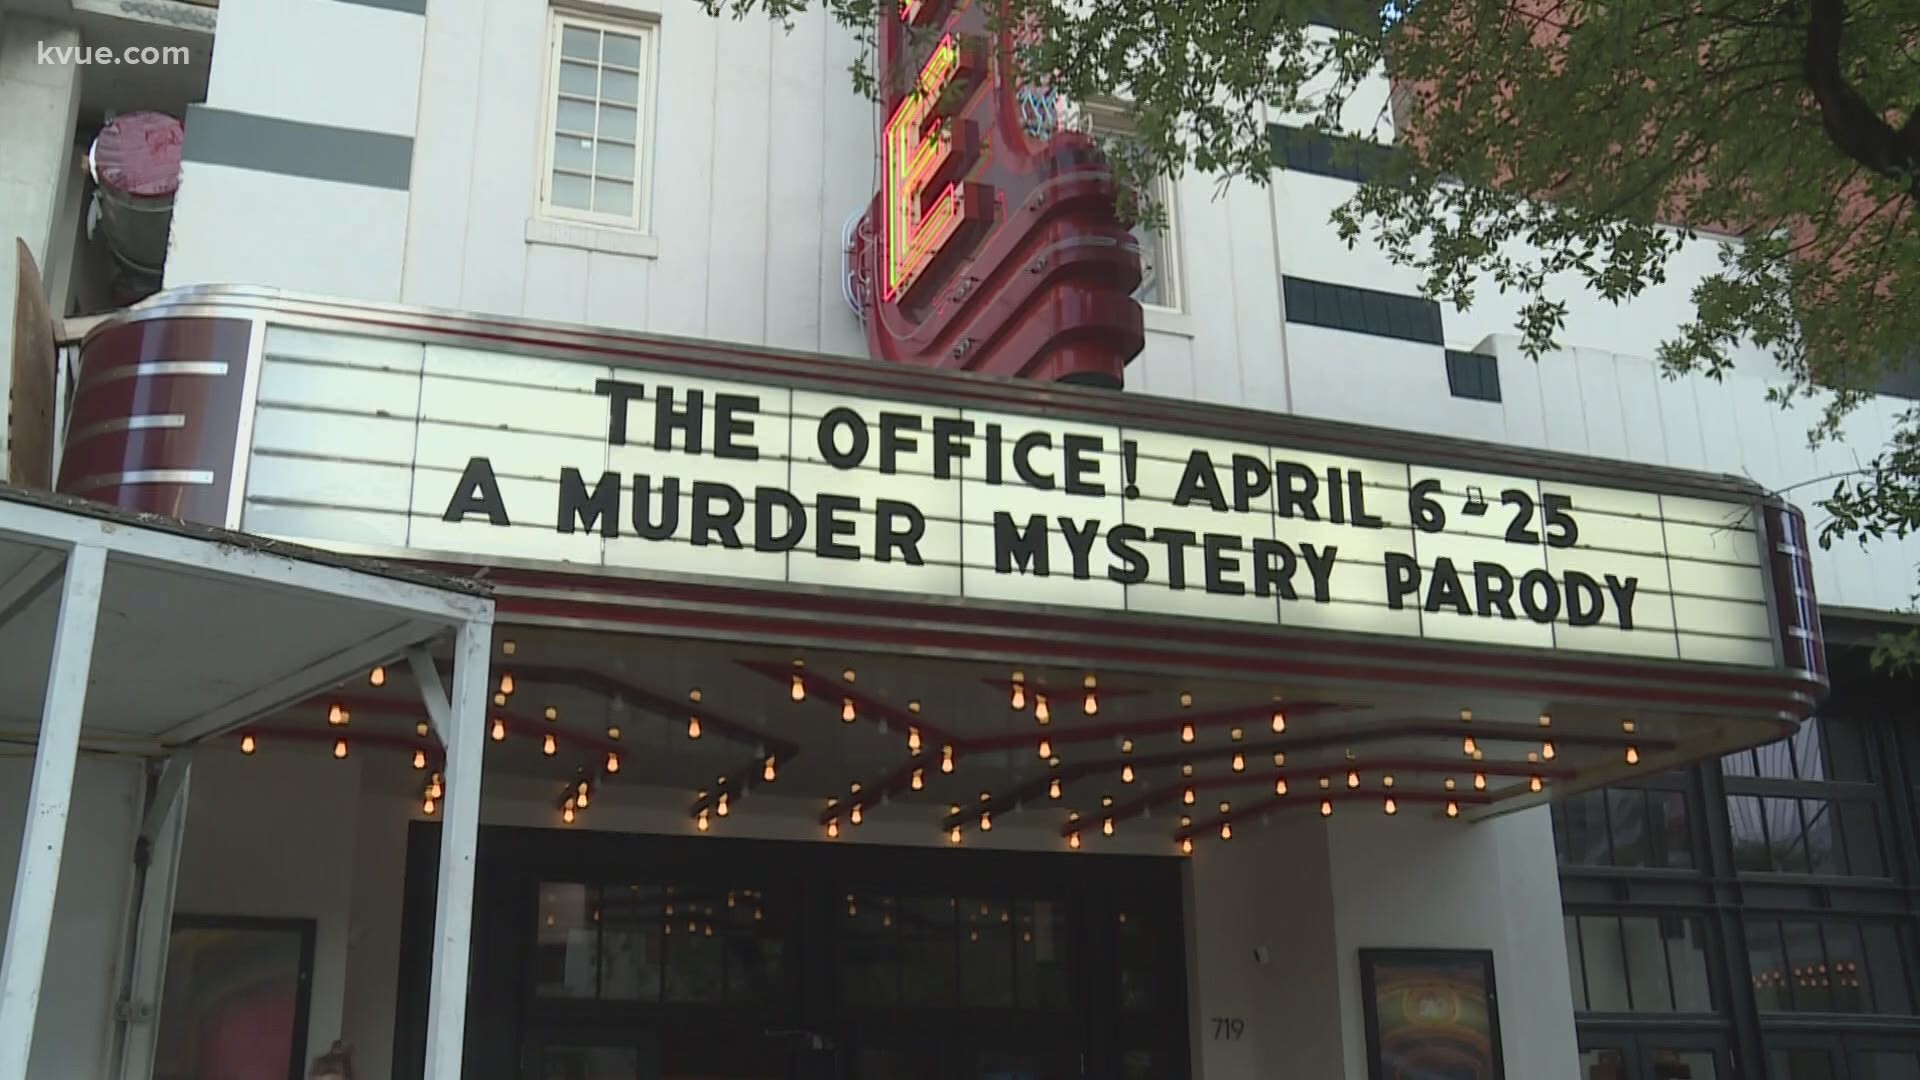 If you're a fan of the TV show "The Office," a new murder mystery experience coming to the Paramount Theatre will be right up your alley.